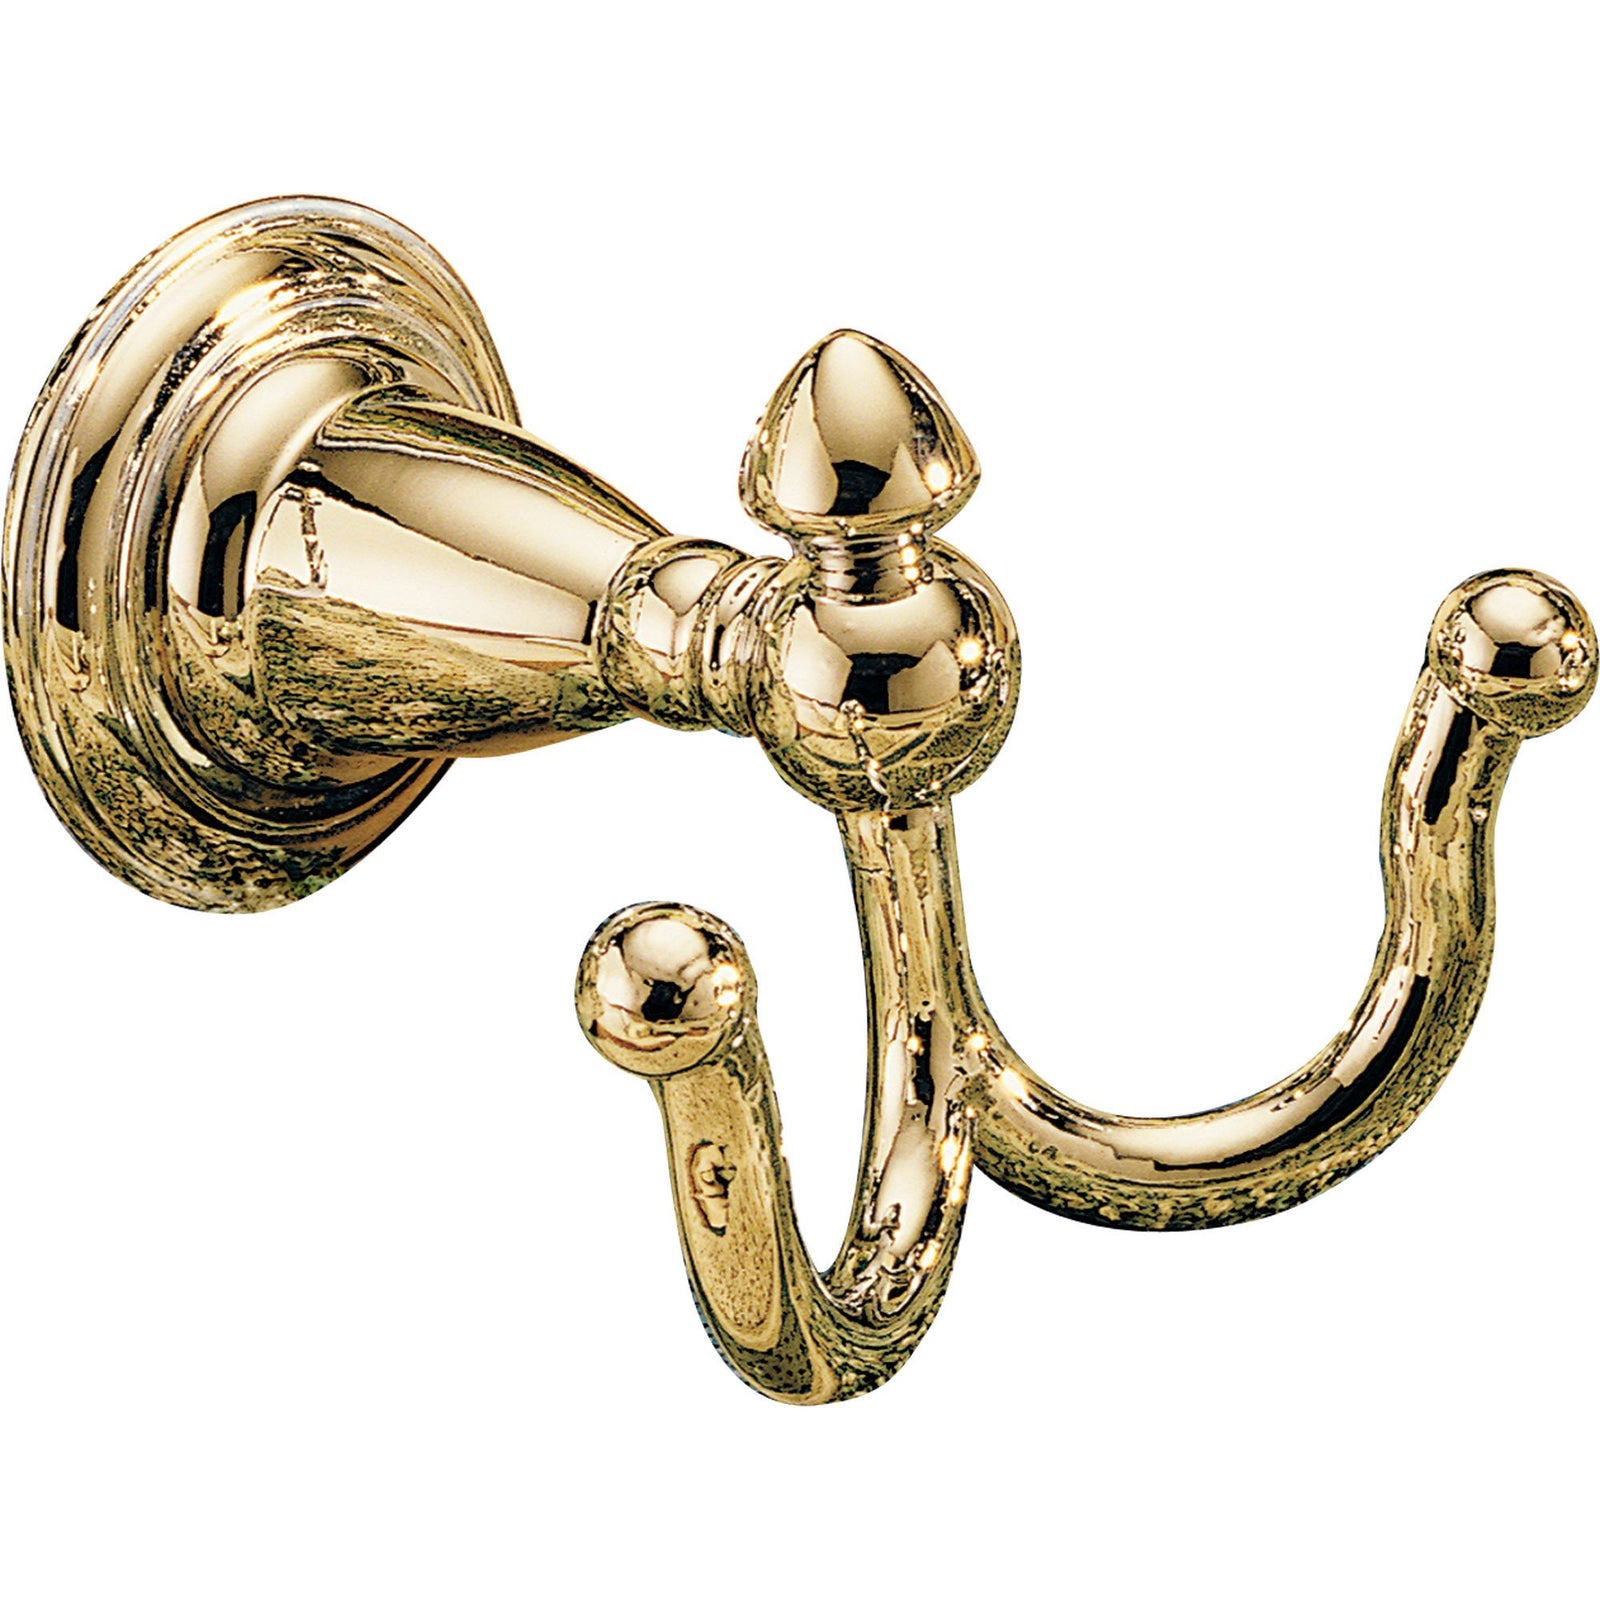 Robe Hooks - Get a Decorative Robe or Towel Hook for you Bathroom